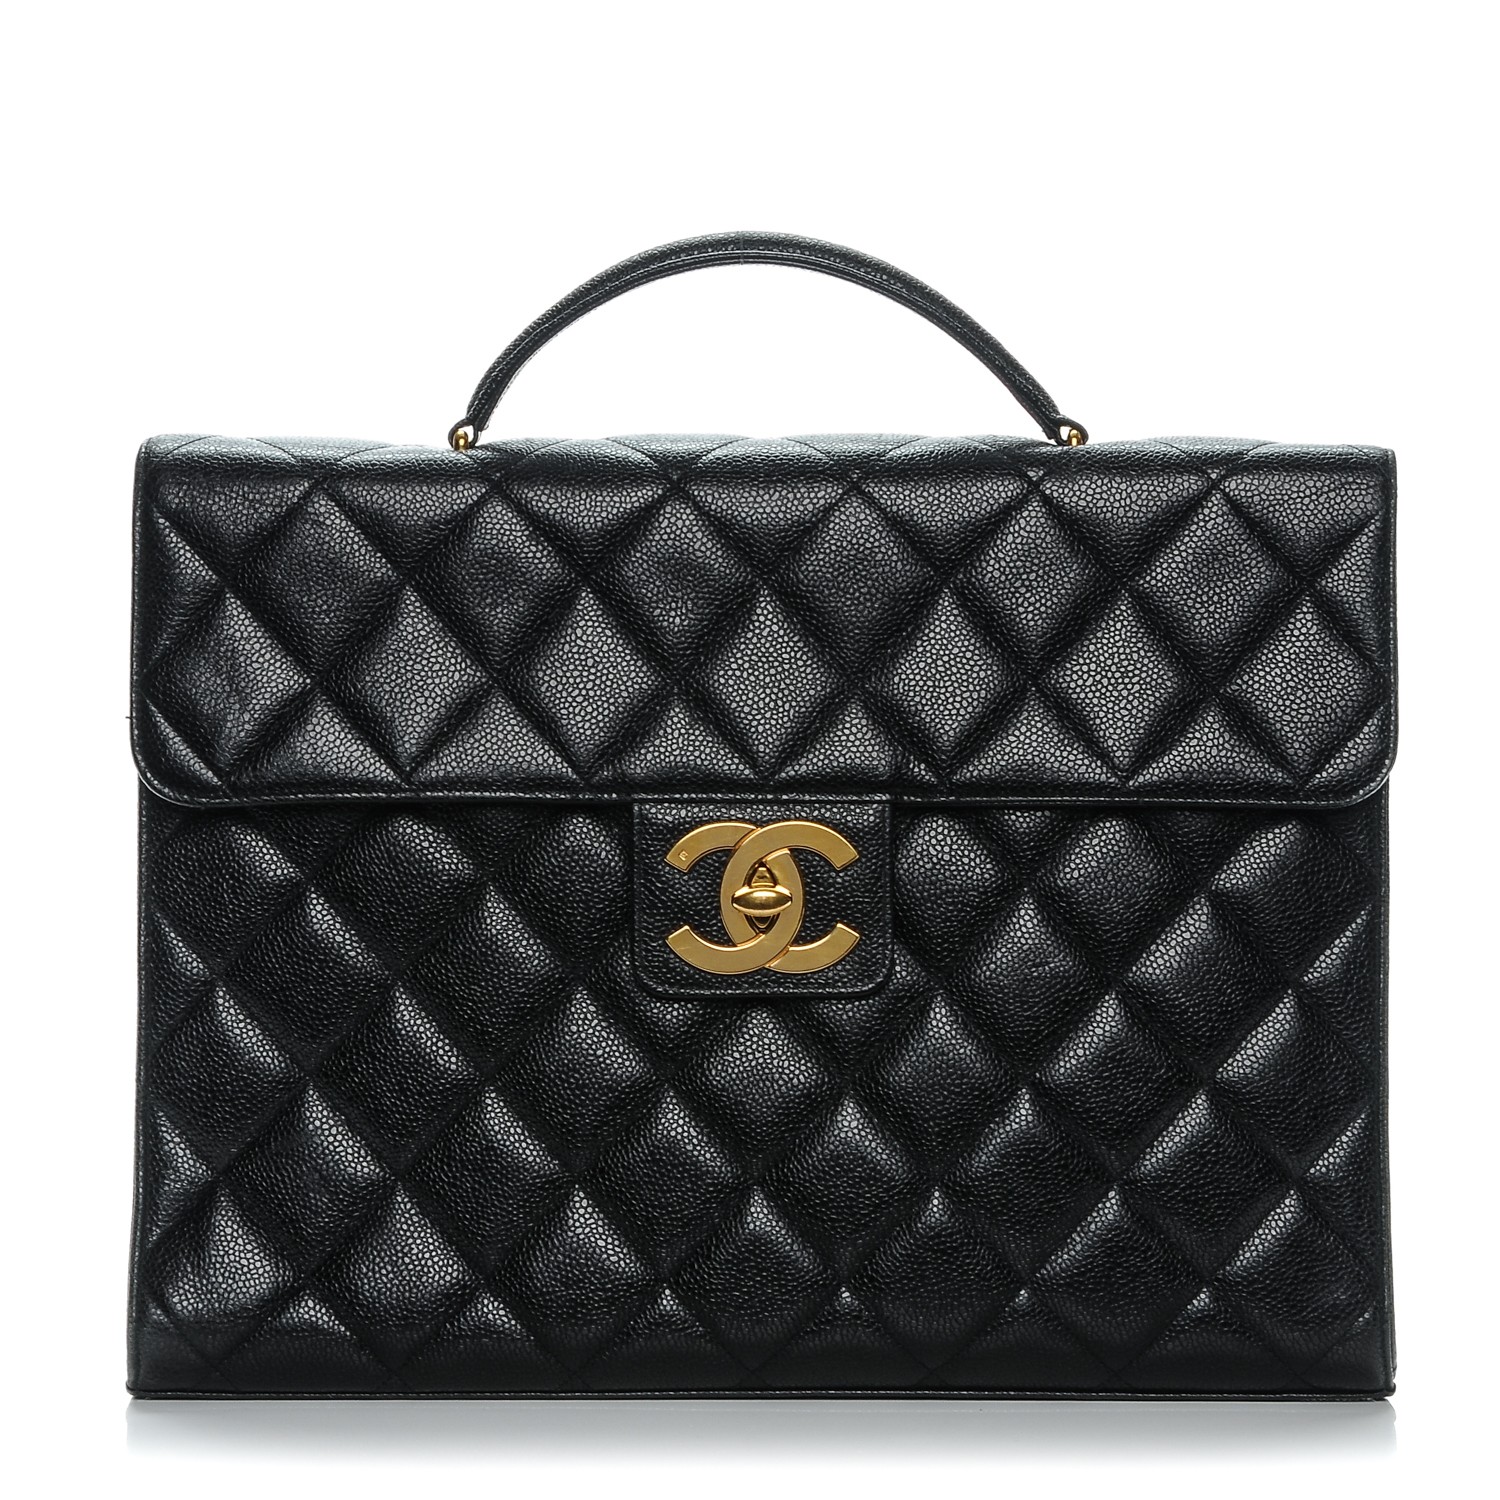 CHANEL Caviar Quilted Briefcase Laptop Bag Black 206183